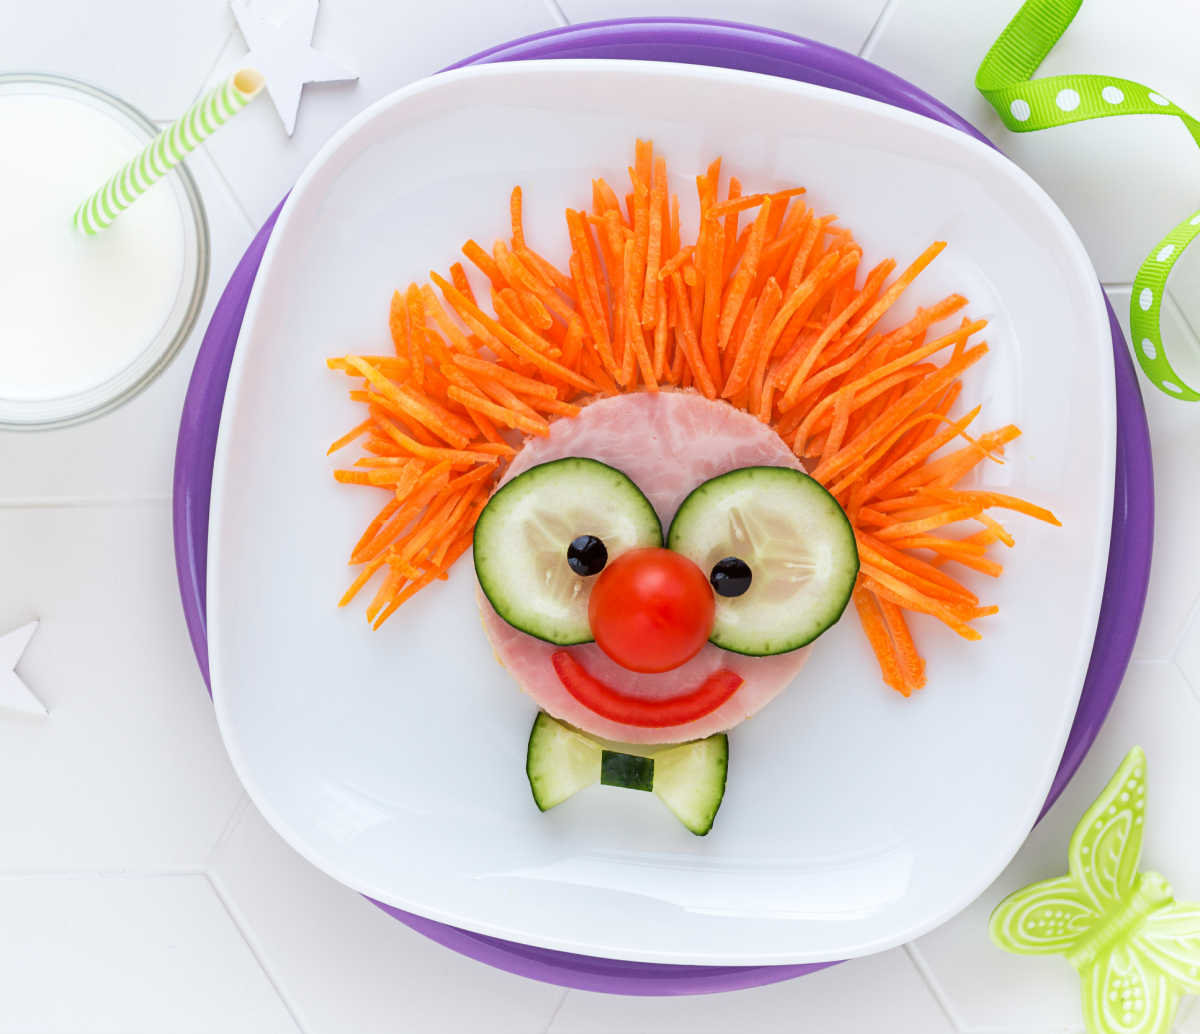 Clown made out of vegetables on a white plate.